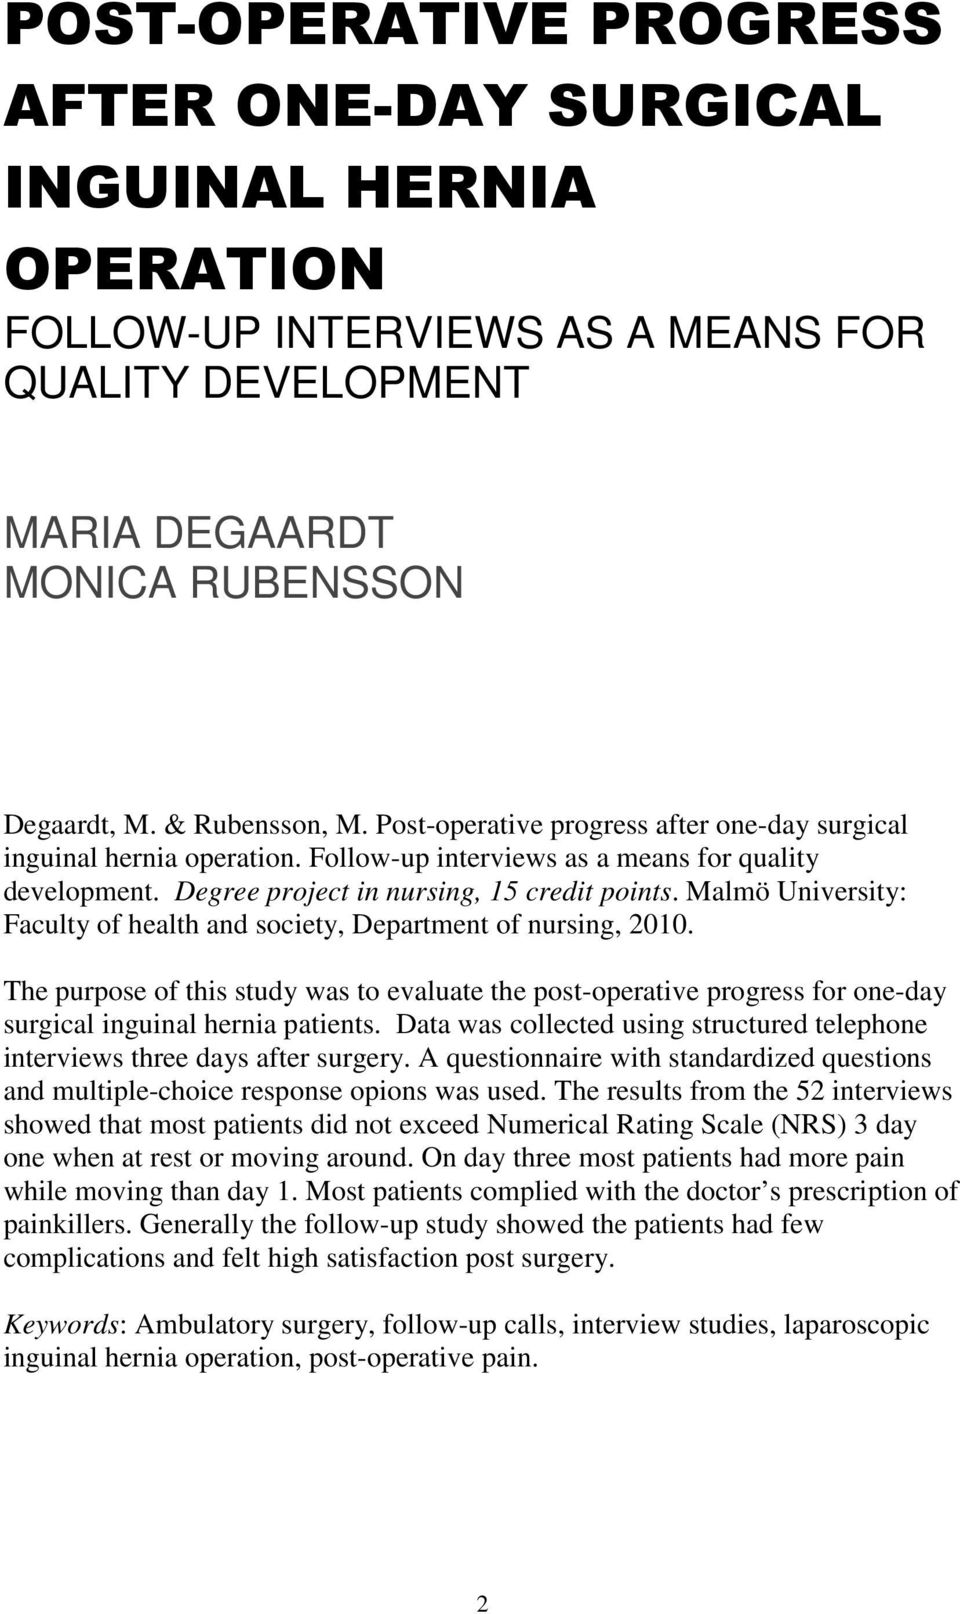 Malmö University: Faculty of health and society, Department of nursing, 2010. The purpose of this study was to evaluate the post-operative progress for one-day surgical inguinal hernia patients.